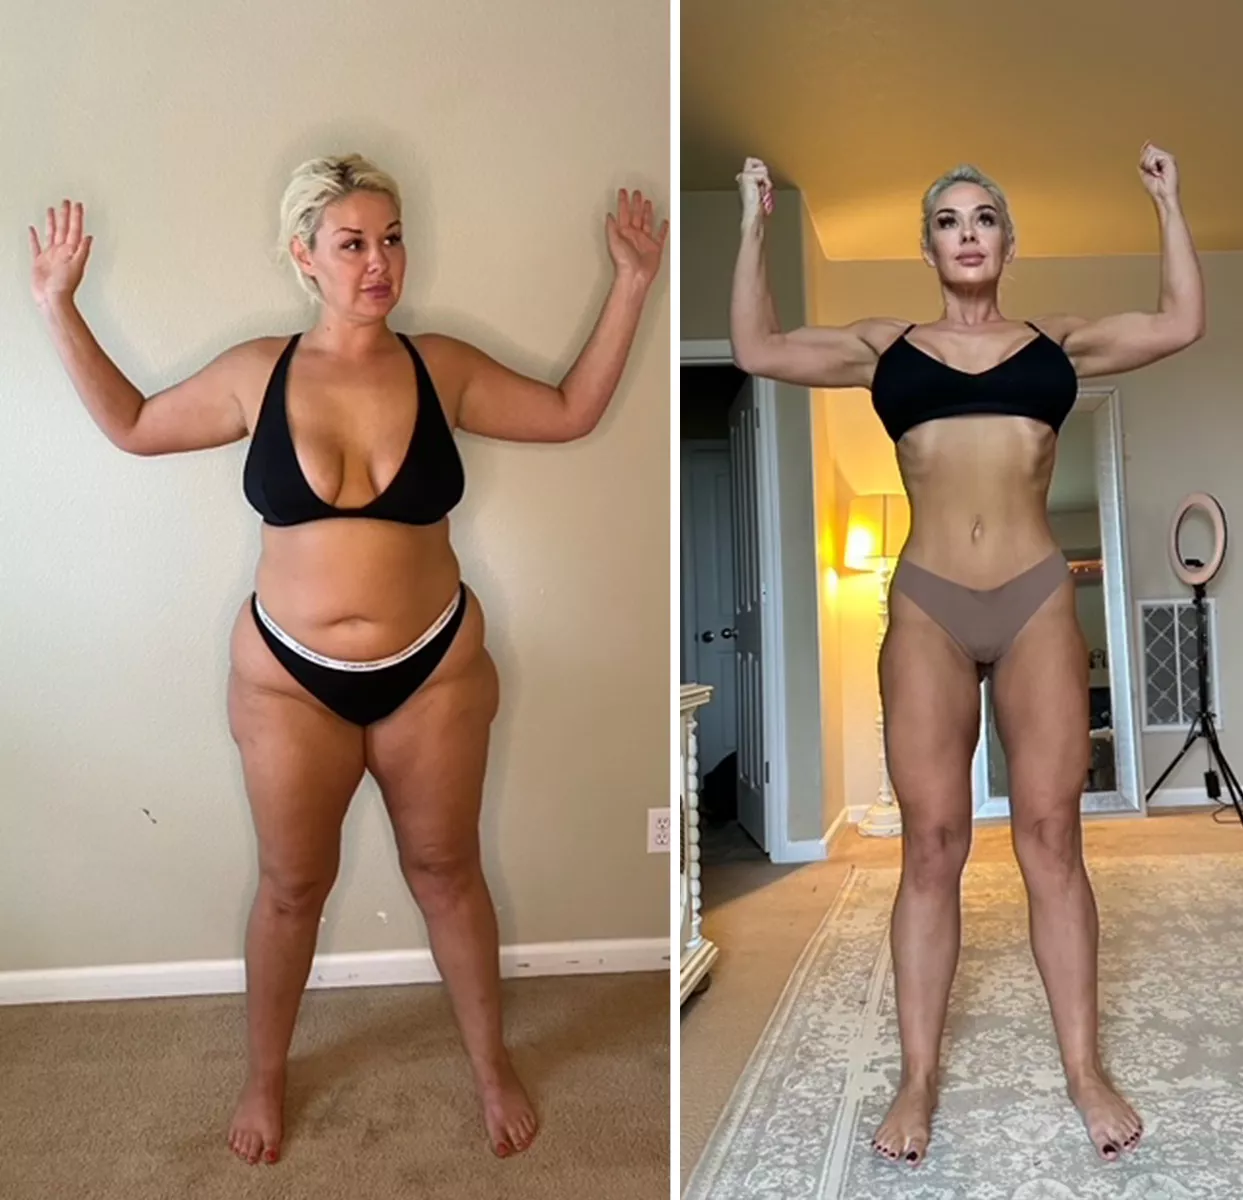 Fitness trainer gains and loses 70 pounds in 1 year – on purpose